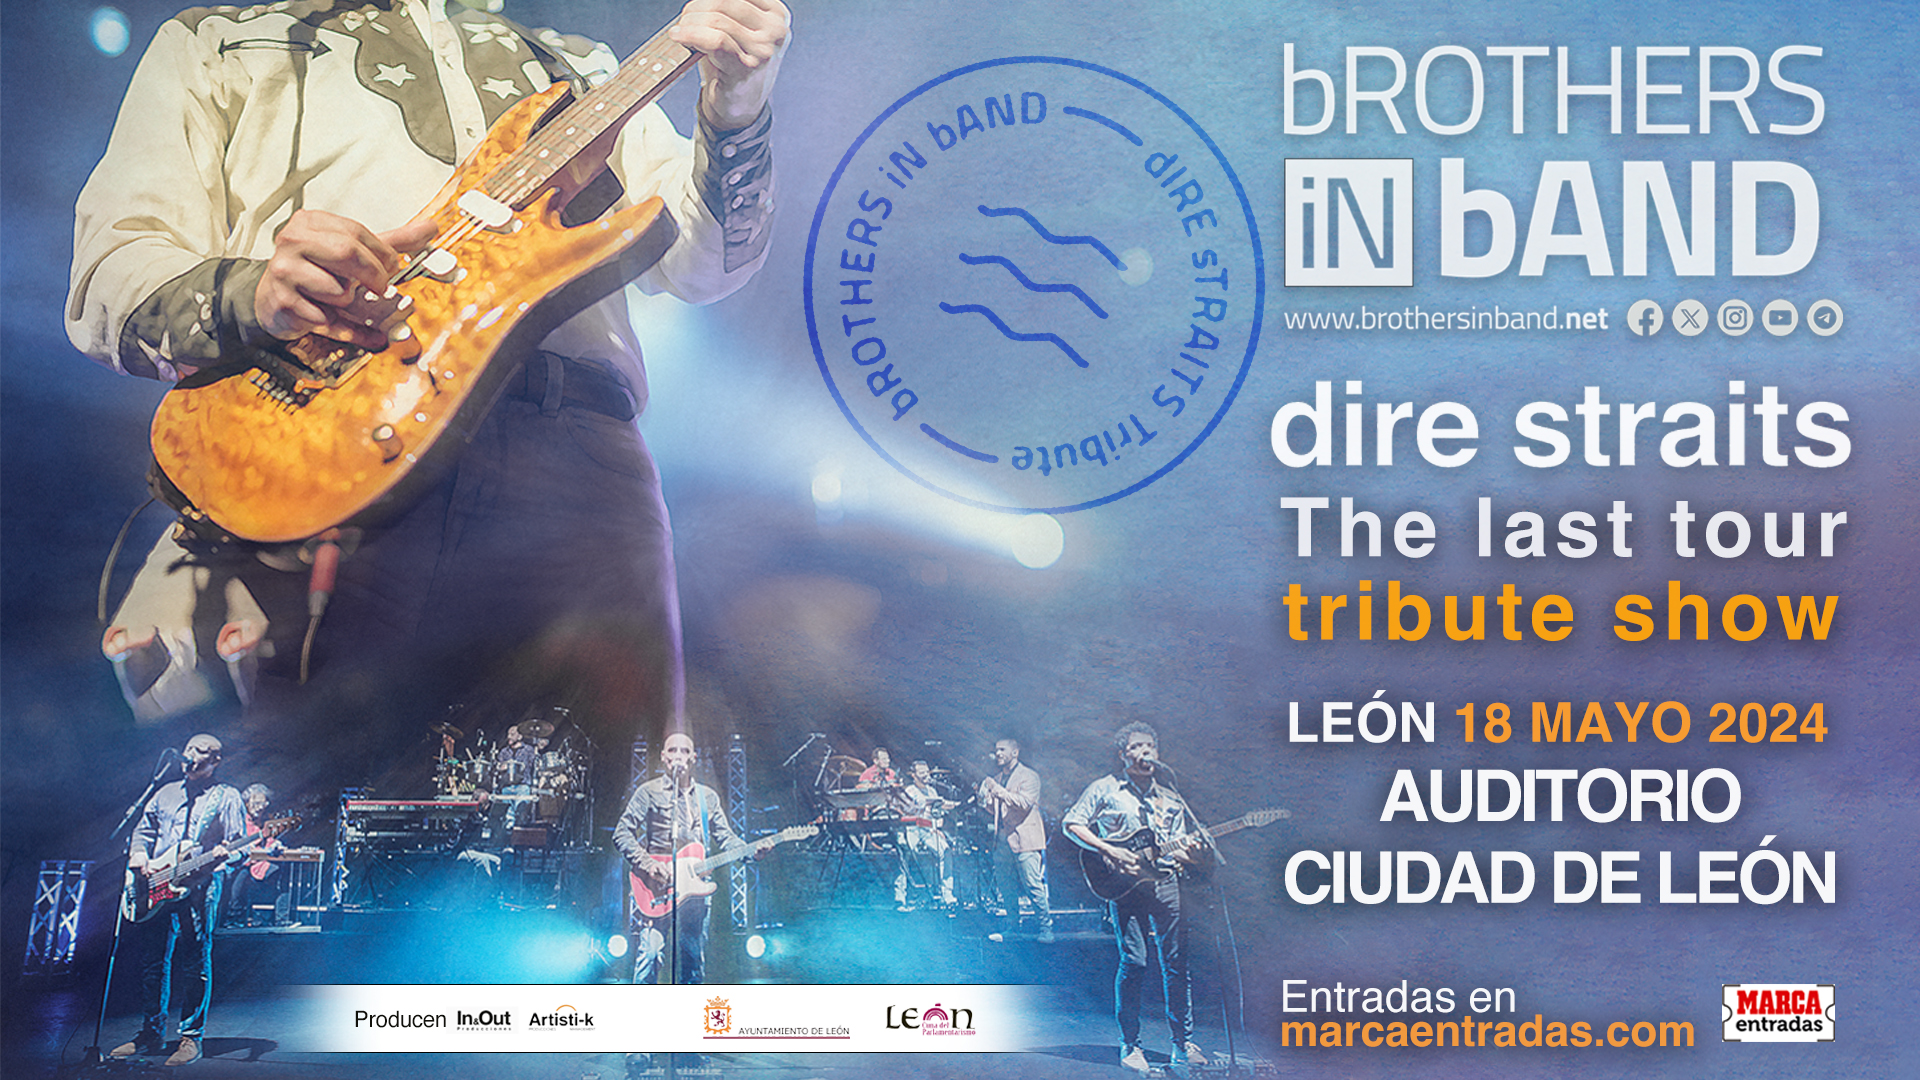 bROTHERS iN bAND. "The Last Tour of dIRE sTRAITS"